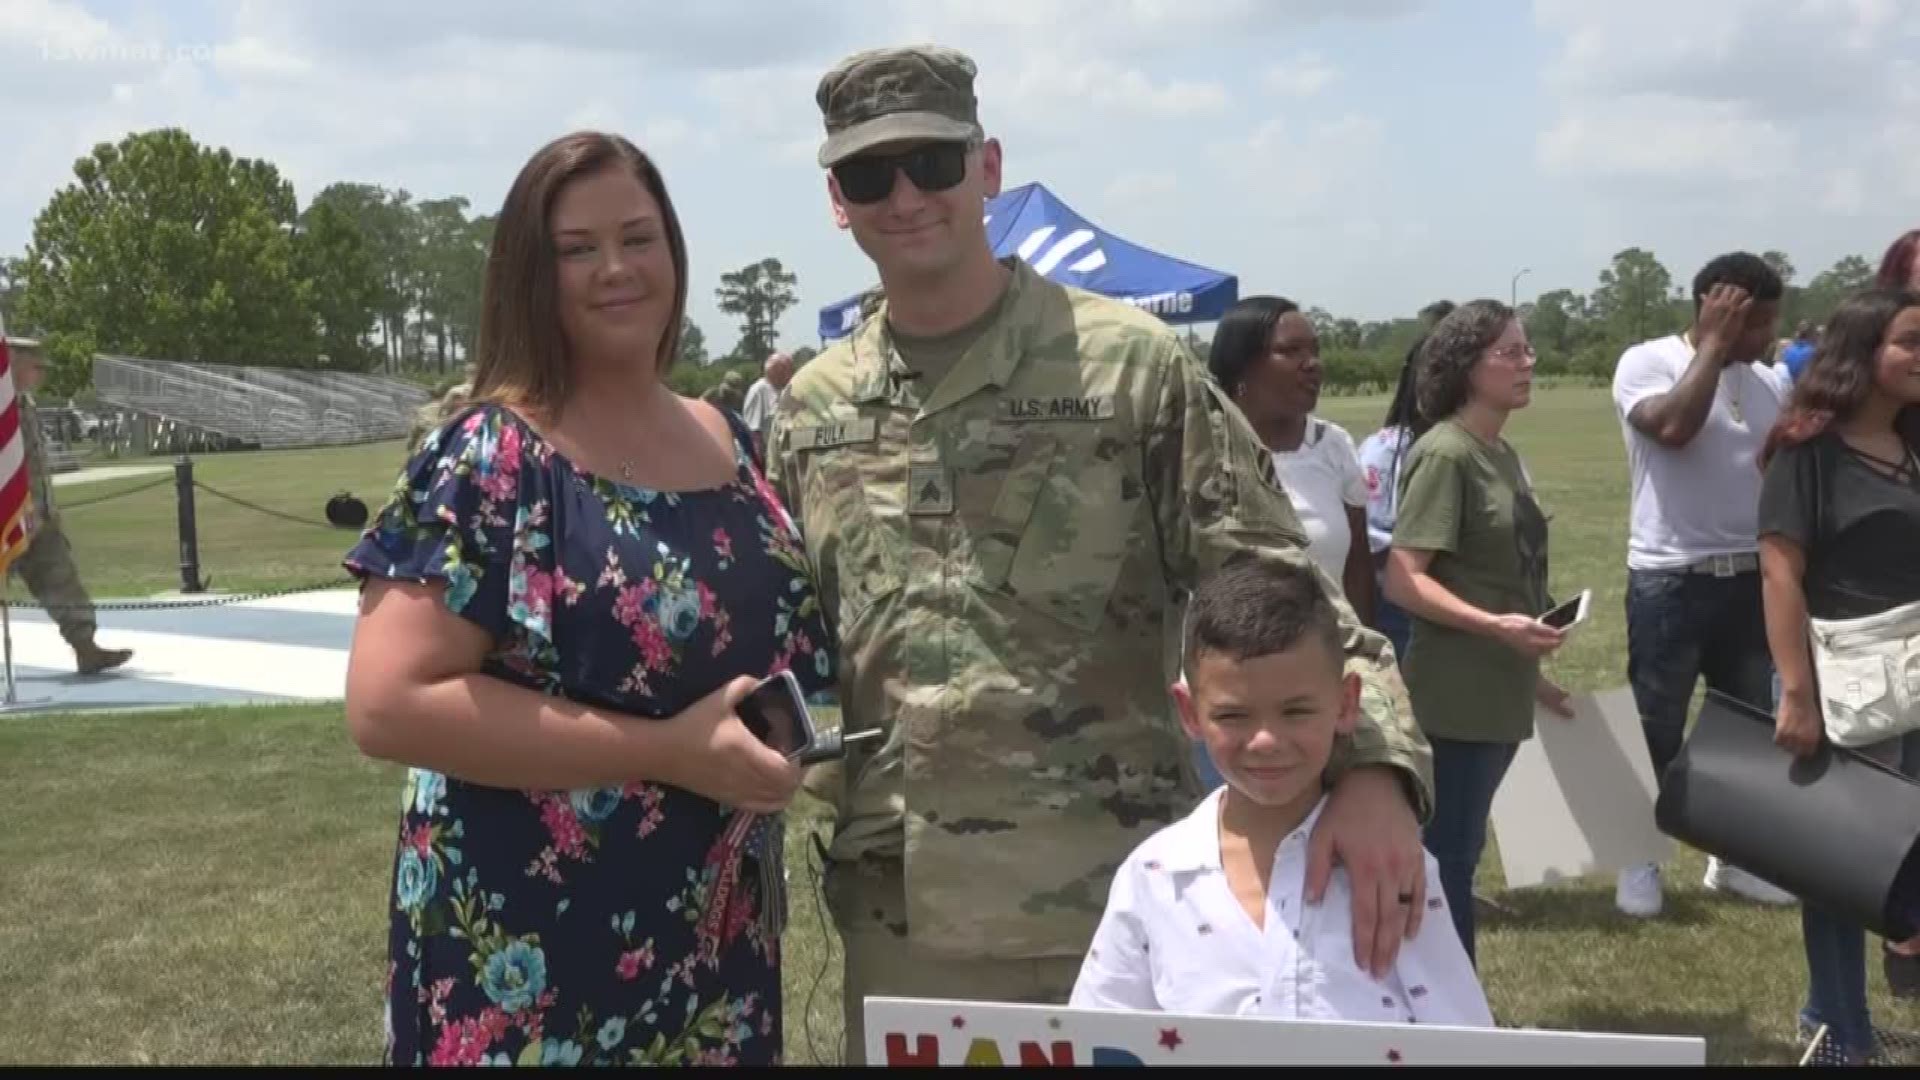 After six months overseas in Afghanistan, soldiers from the 48th Brigade returned home Wednesday.  Kayla Solomon captured the moment when they reunited with their loved ones.